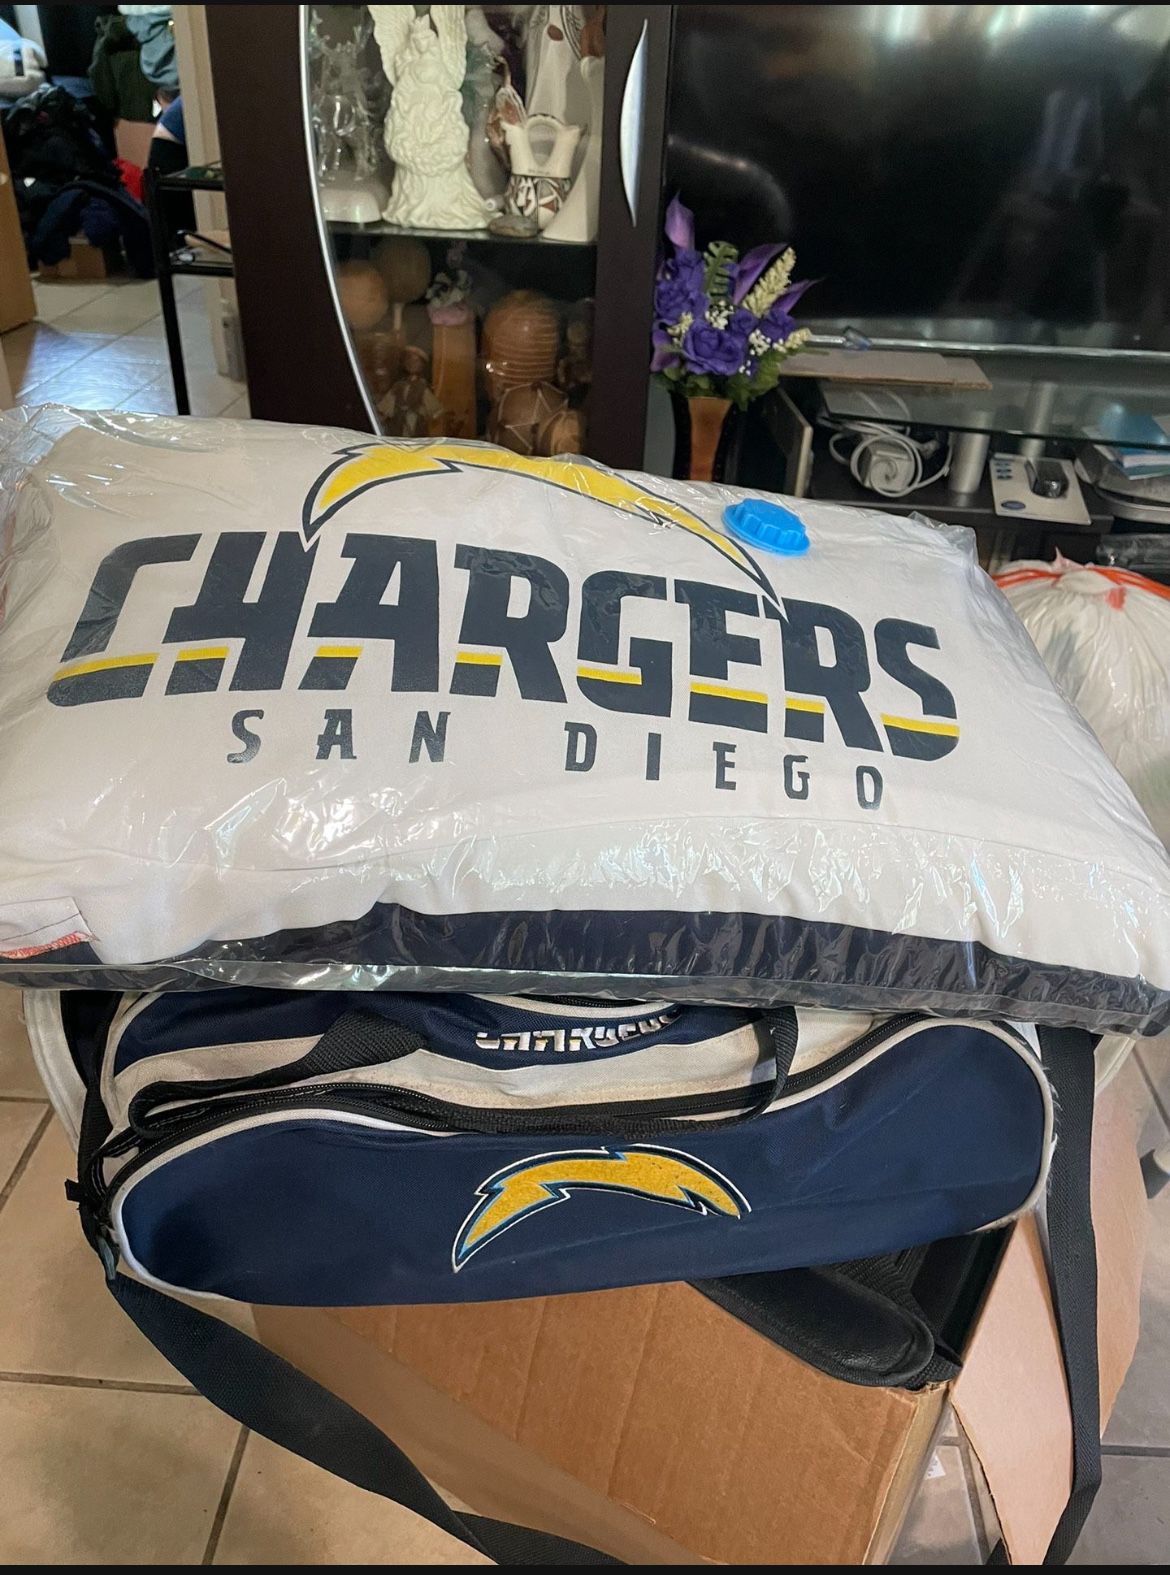 Chargers Gear